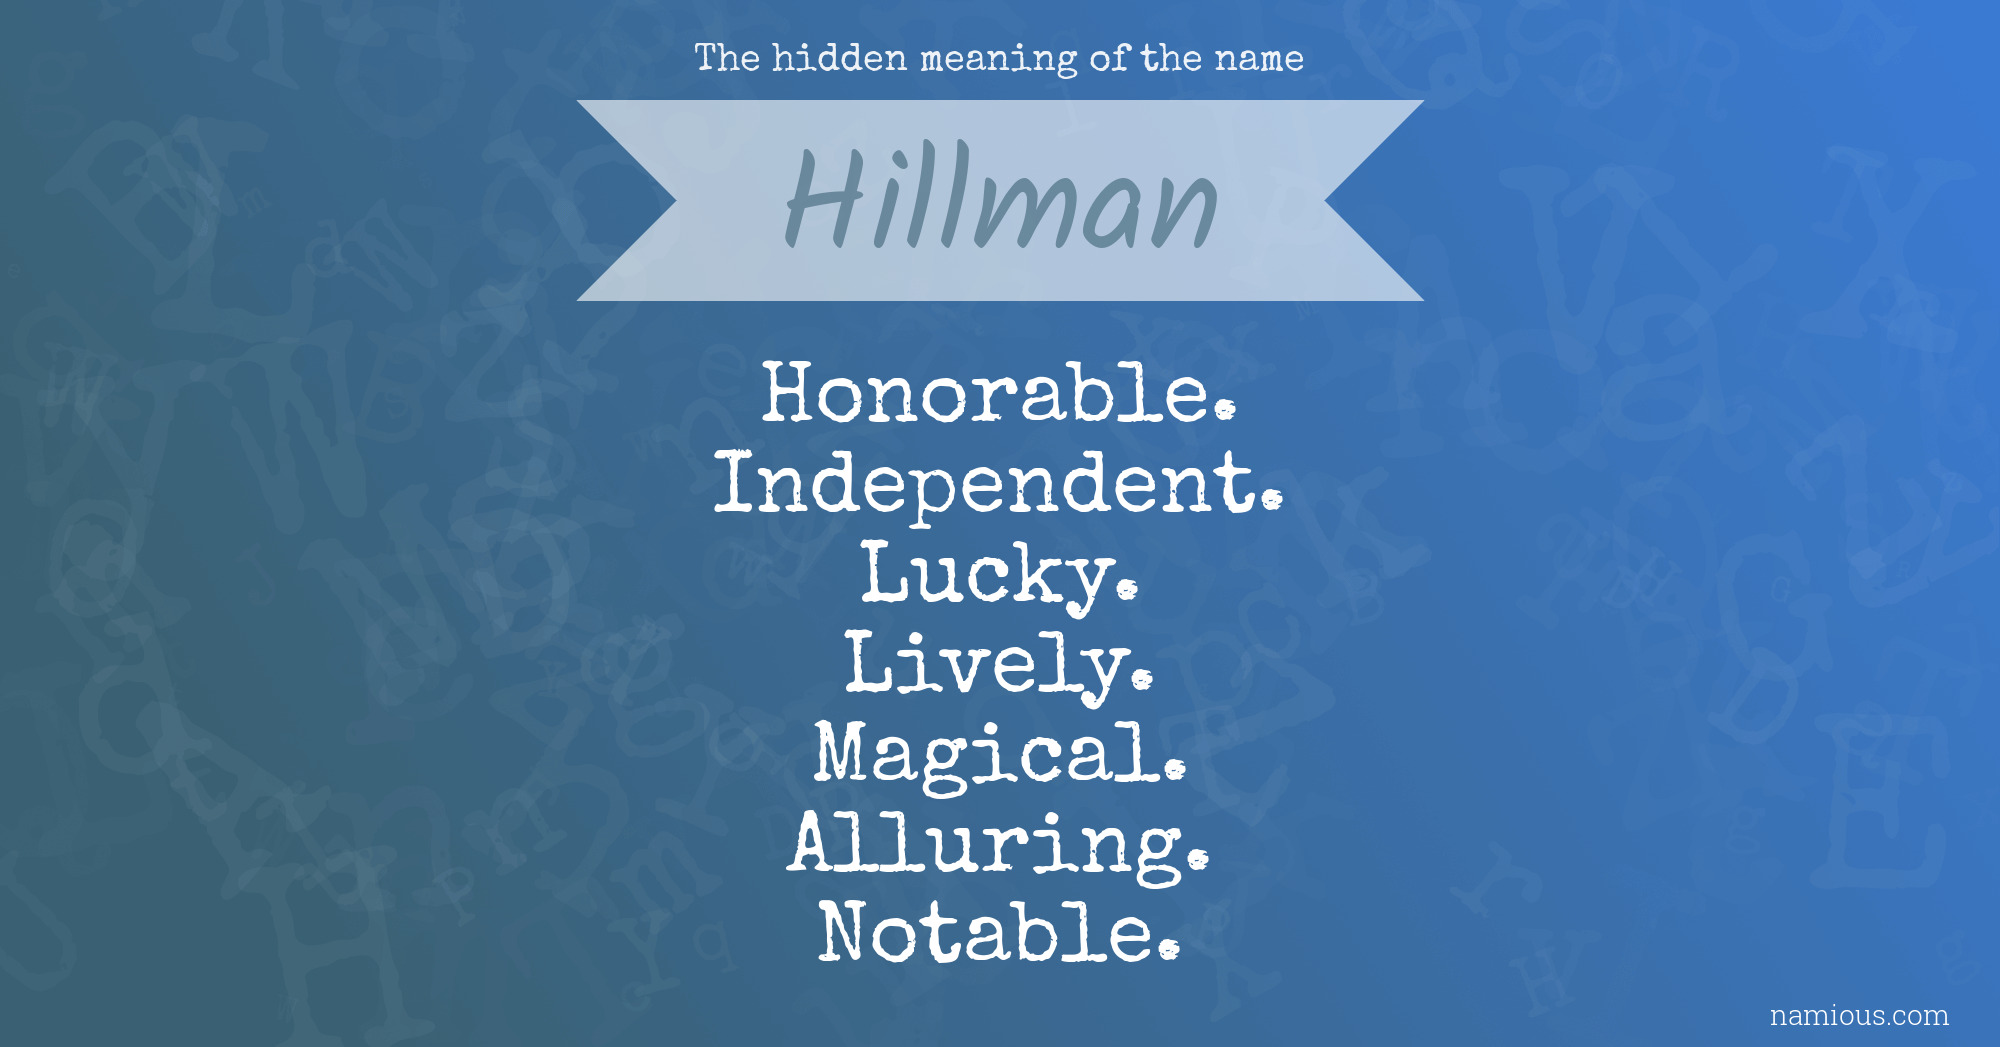 The hidden meaning of the name Hillman